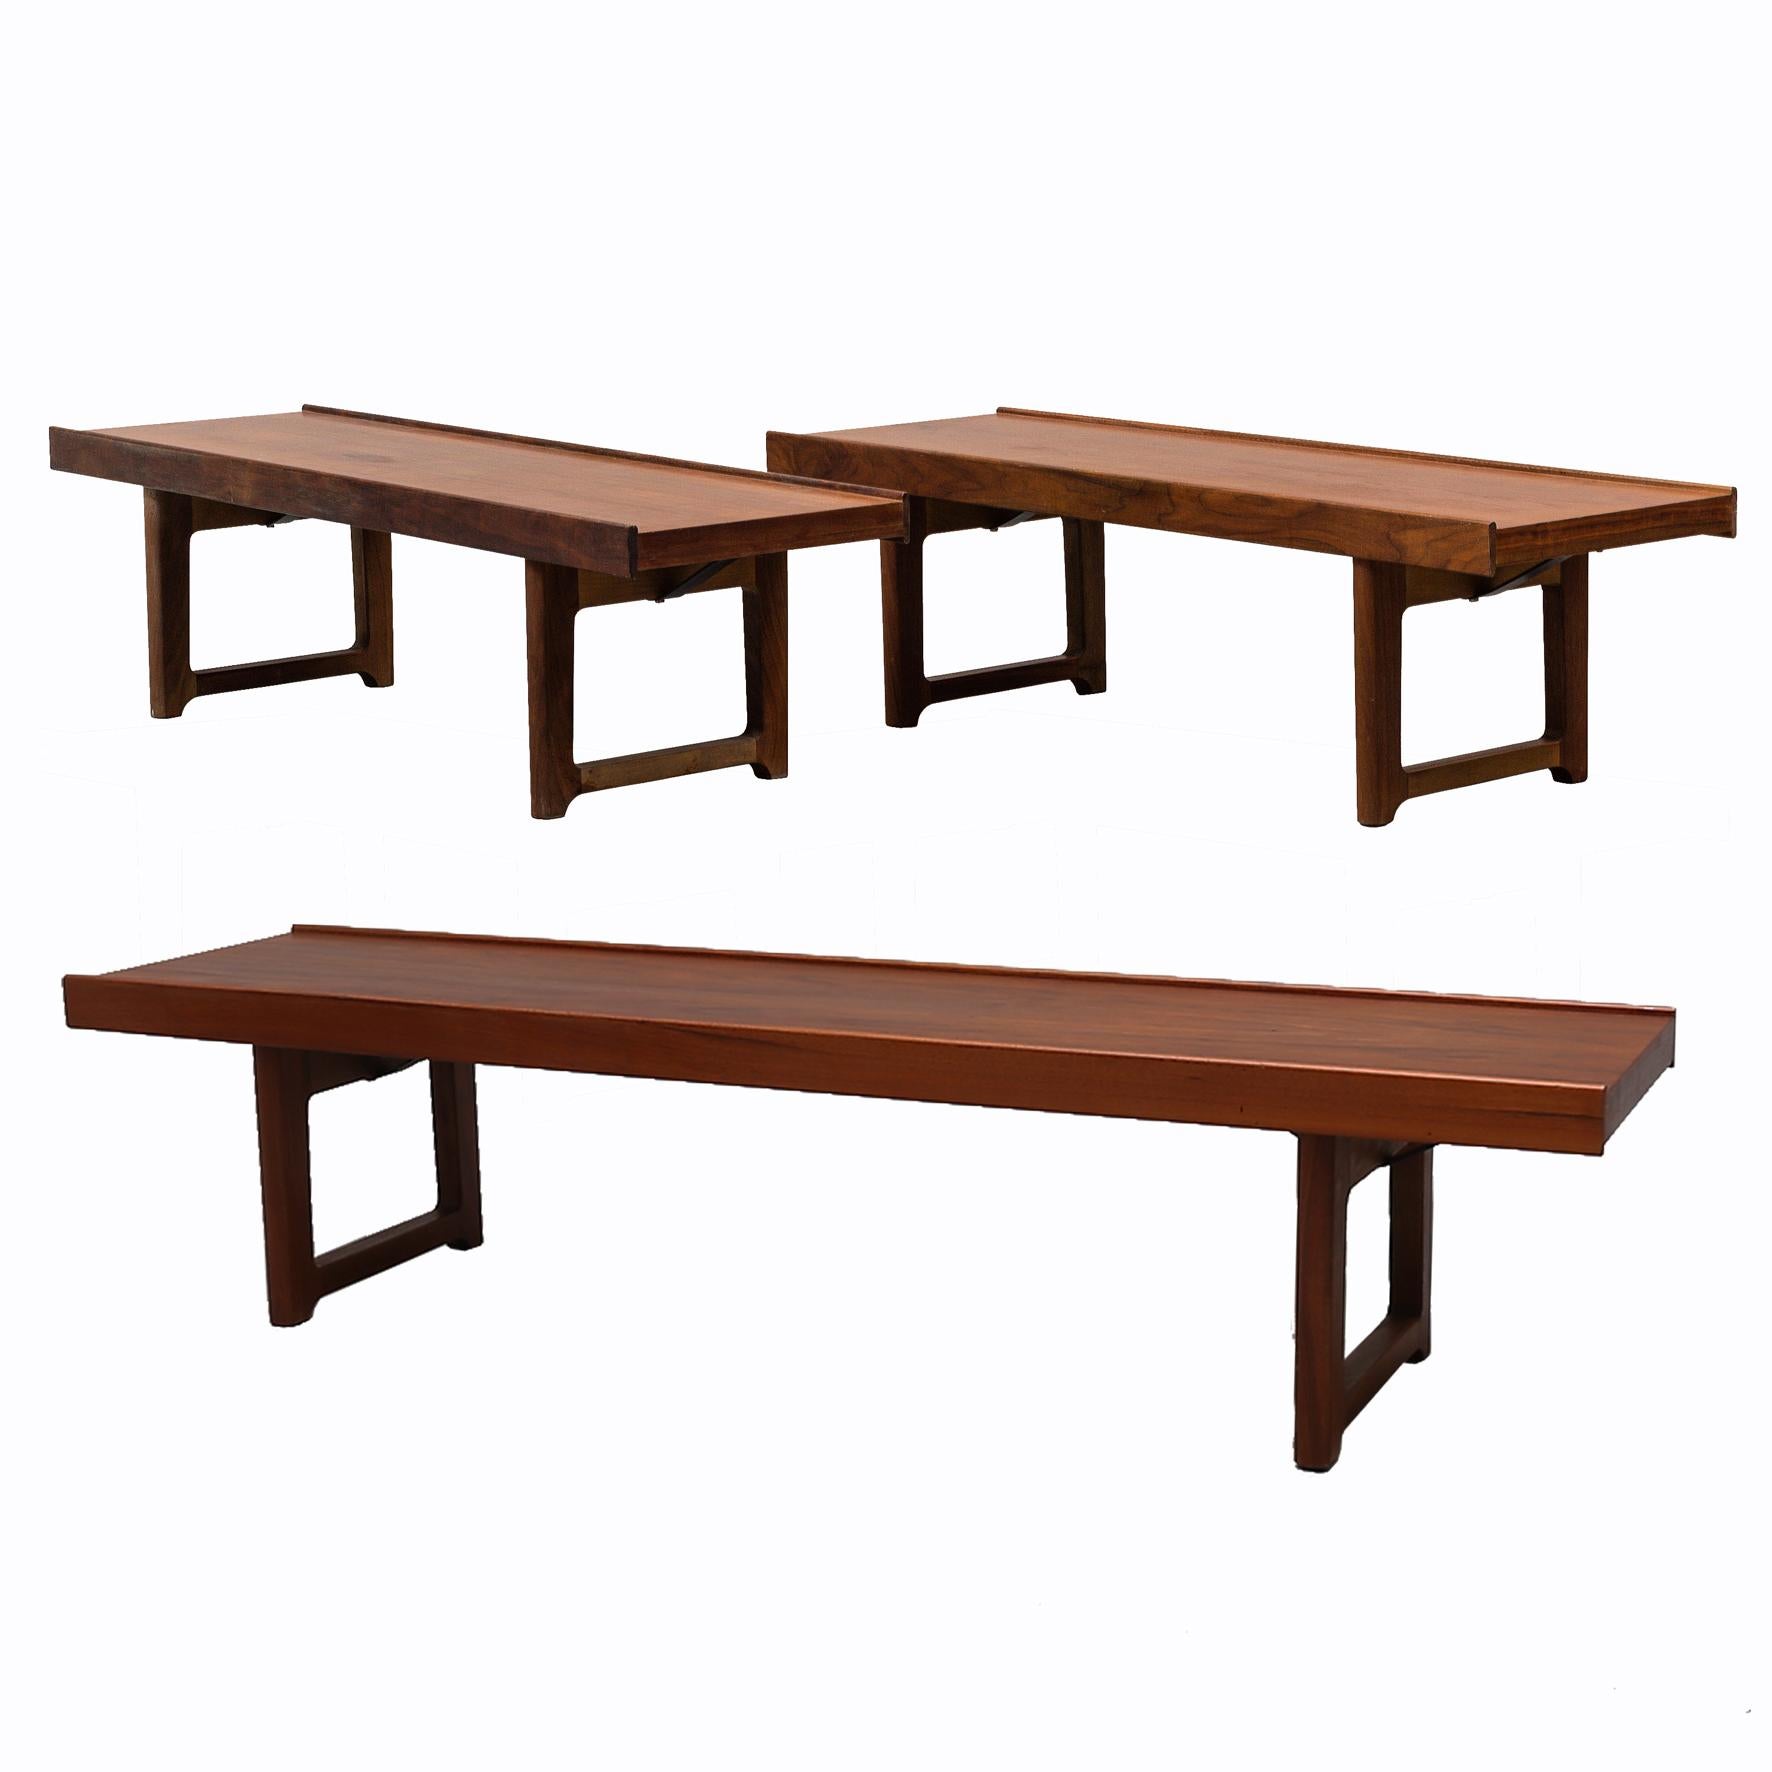 A suite of three rectangular teak side tables/benches.
Each table on two pairs of feet joined by a stretcher.
Manufactured by Bruksbo.
With a label by the producer.
Norway.
1960s.

These pieces can be used weather as tables or benches.

Two